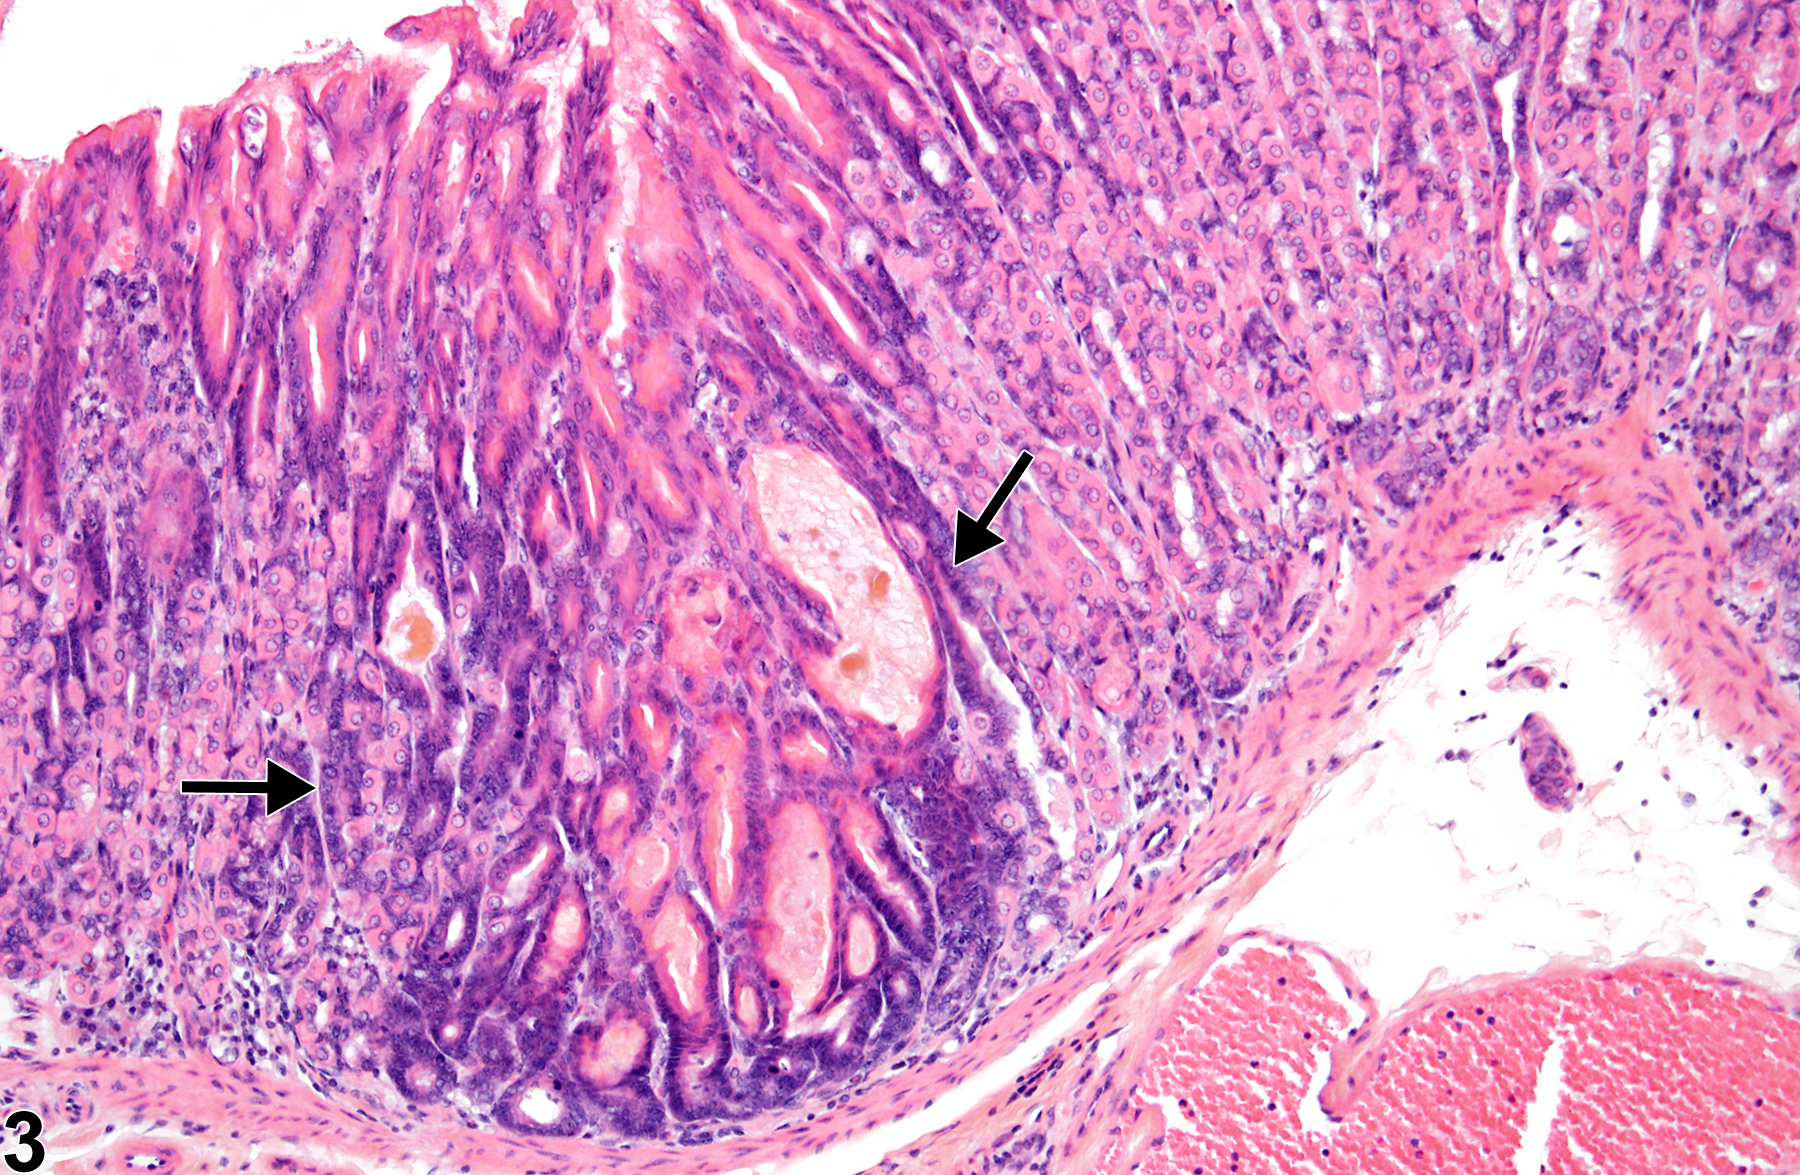 Image of hyperplasia in the glandular stomach epithelium from a male B6C3F1 mouse in a chronic study